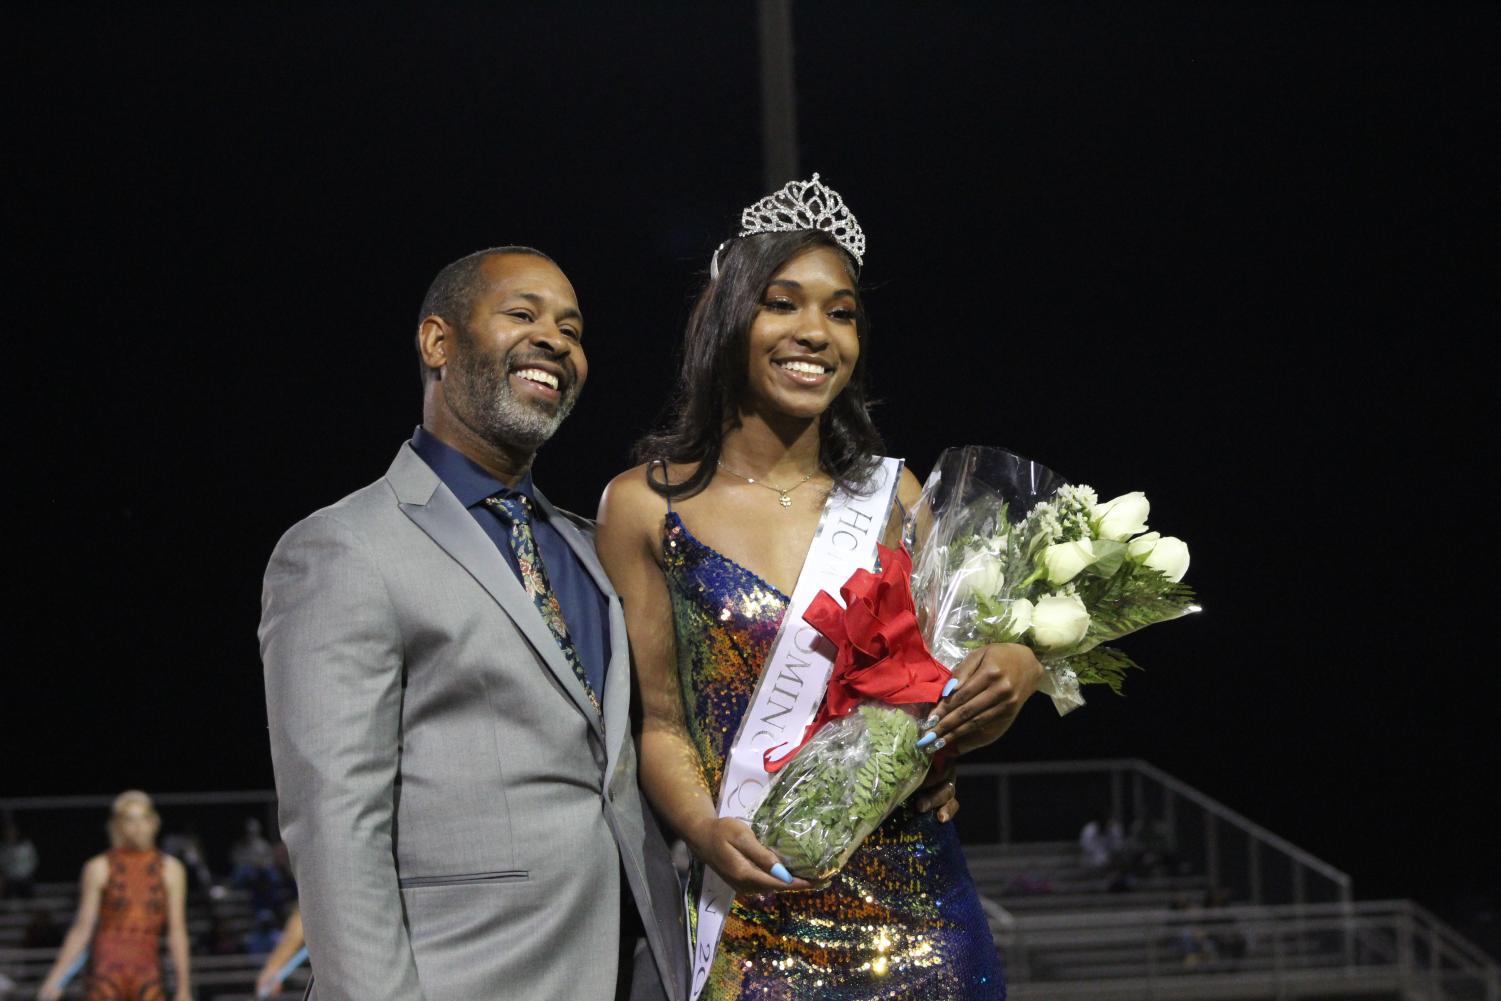 Shainah+Walker+crowned+new+Homecoming+Queen+%7C+HOCO22+Court+Slideshow.